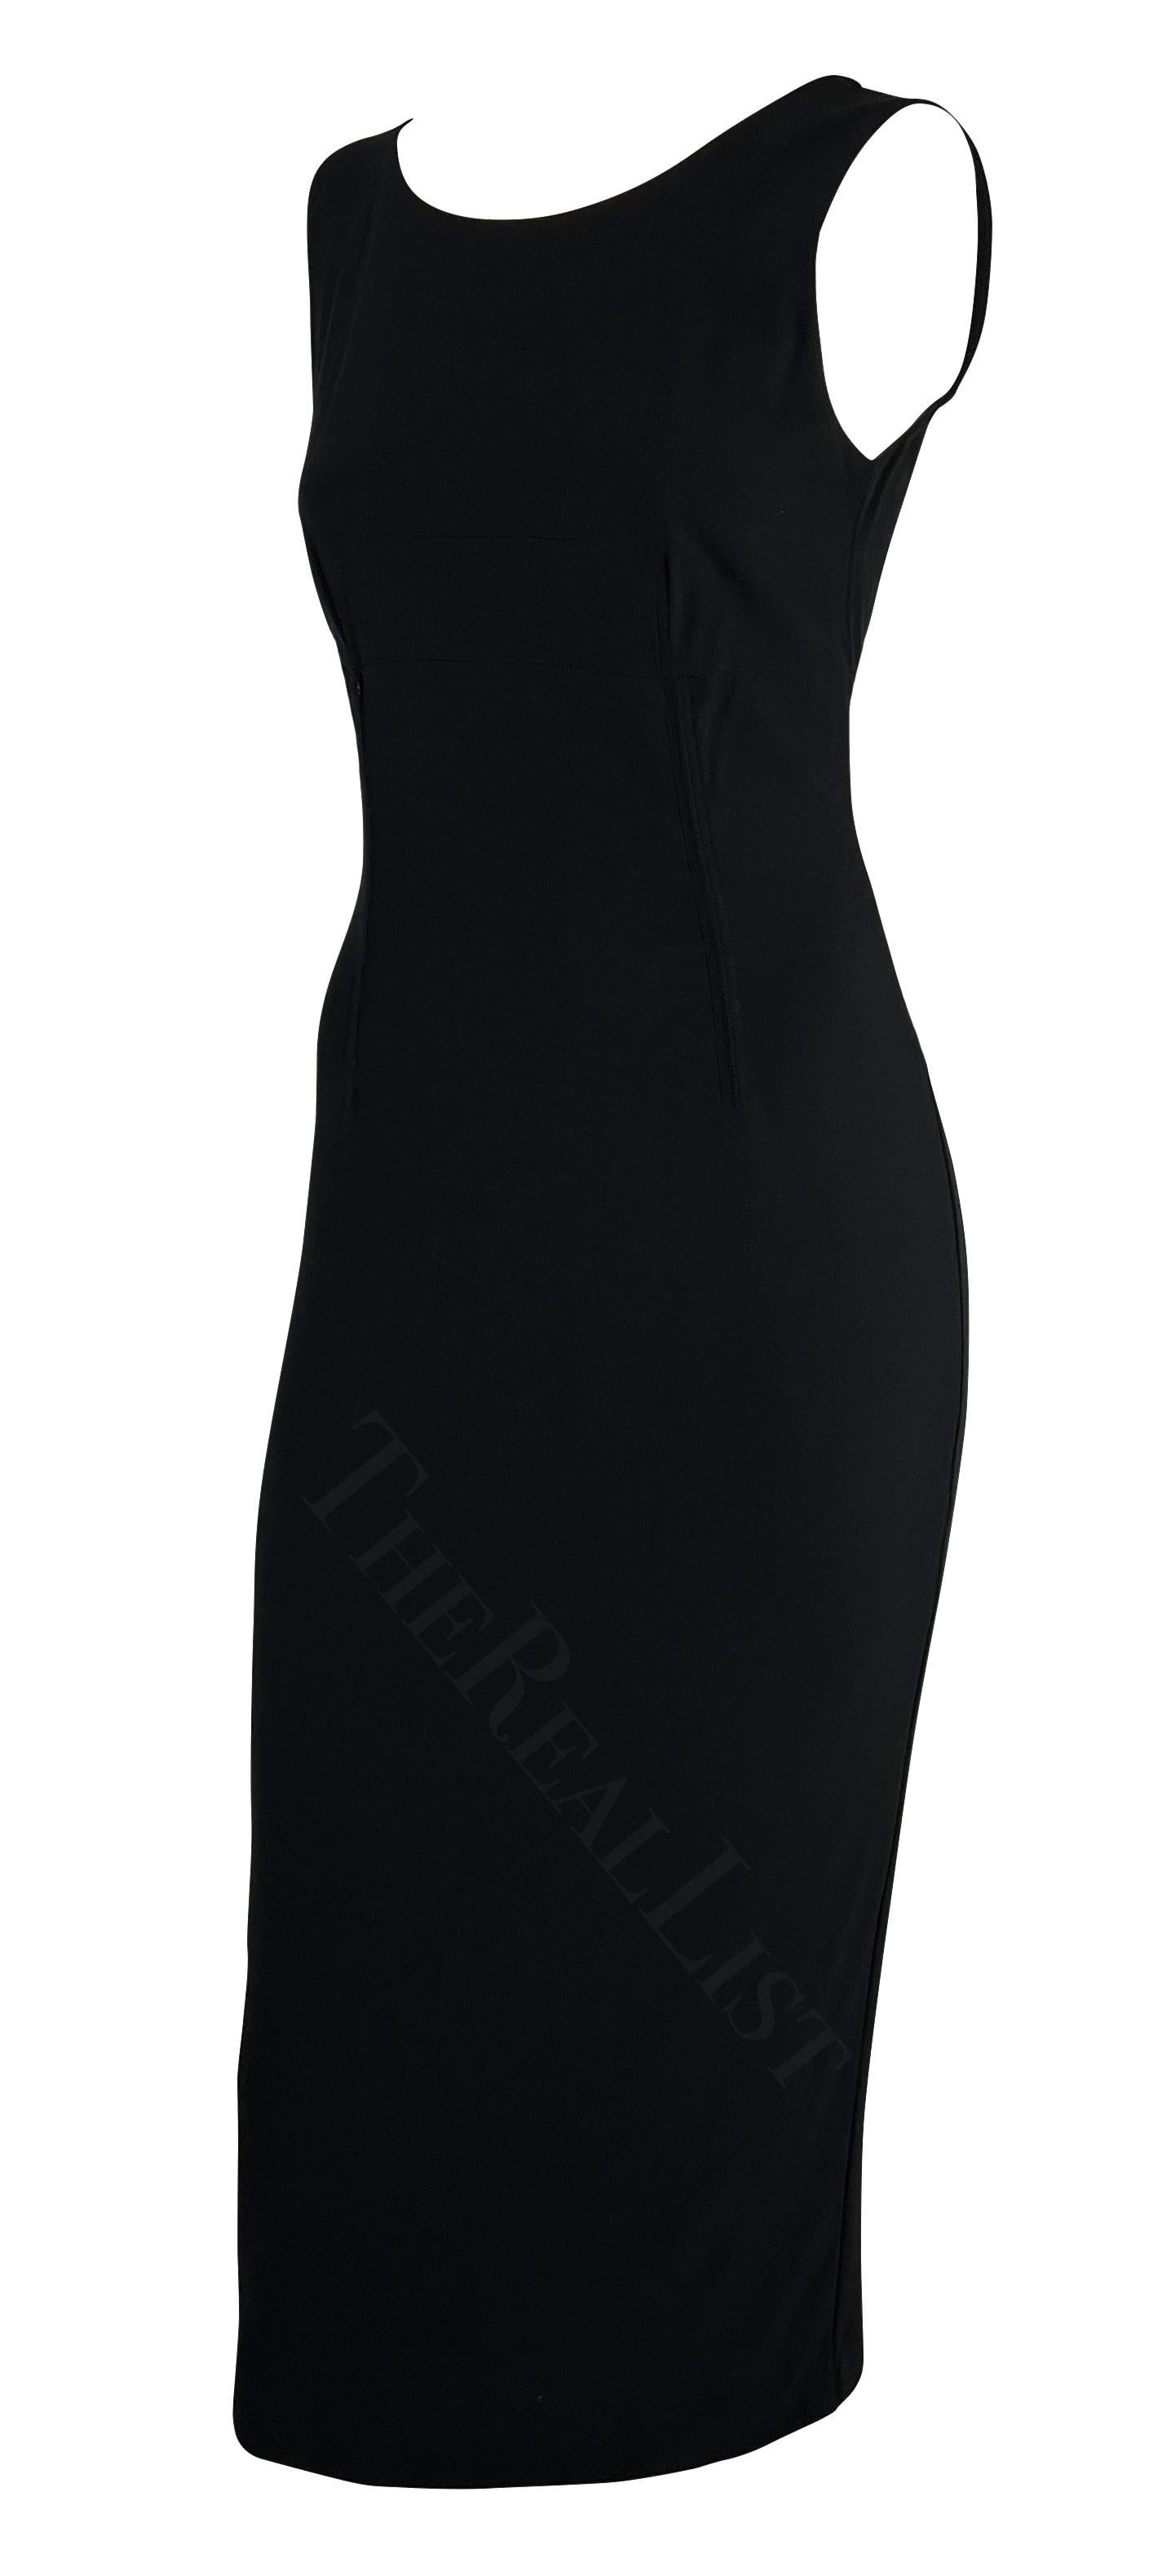 1990s Dolce & Gabbana Black Corset Boned Sleeveless Midi Dress In Excellent Condition For Sale In West Hollywood, CA